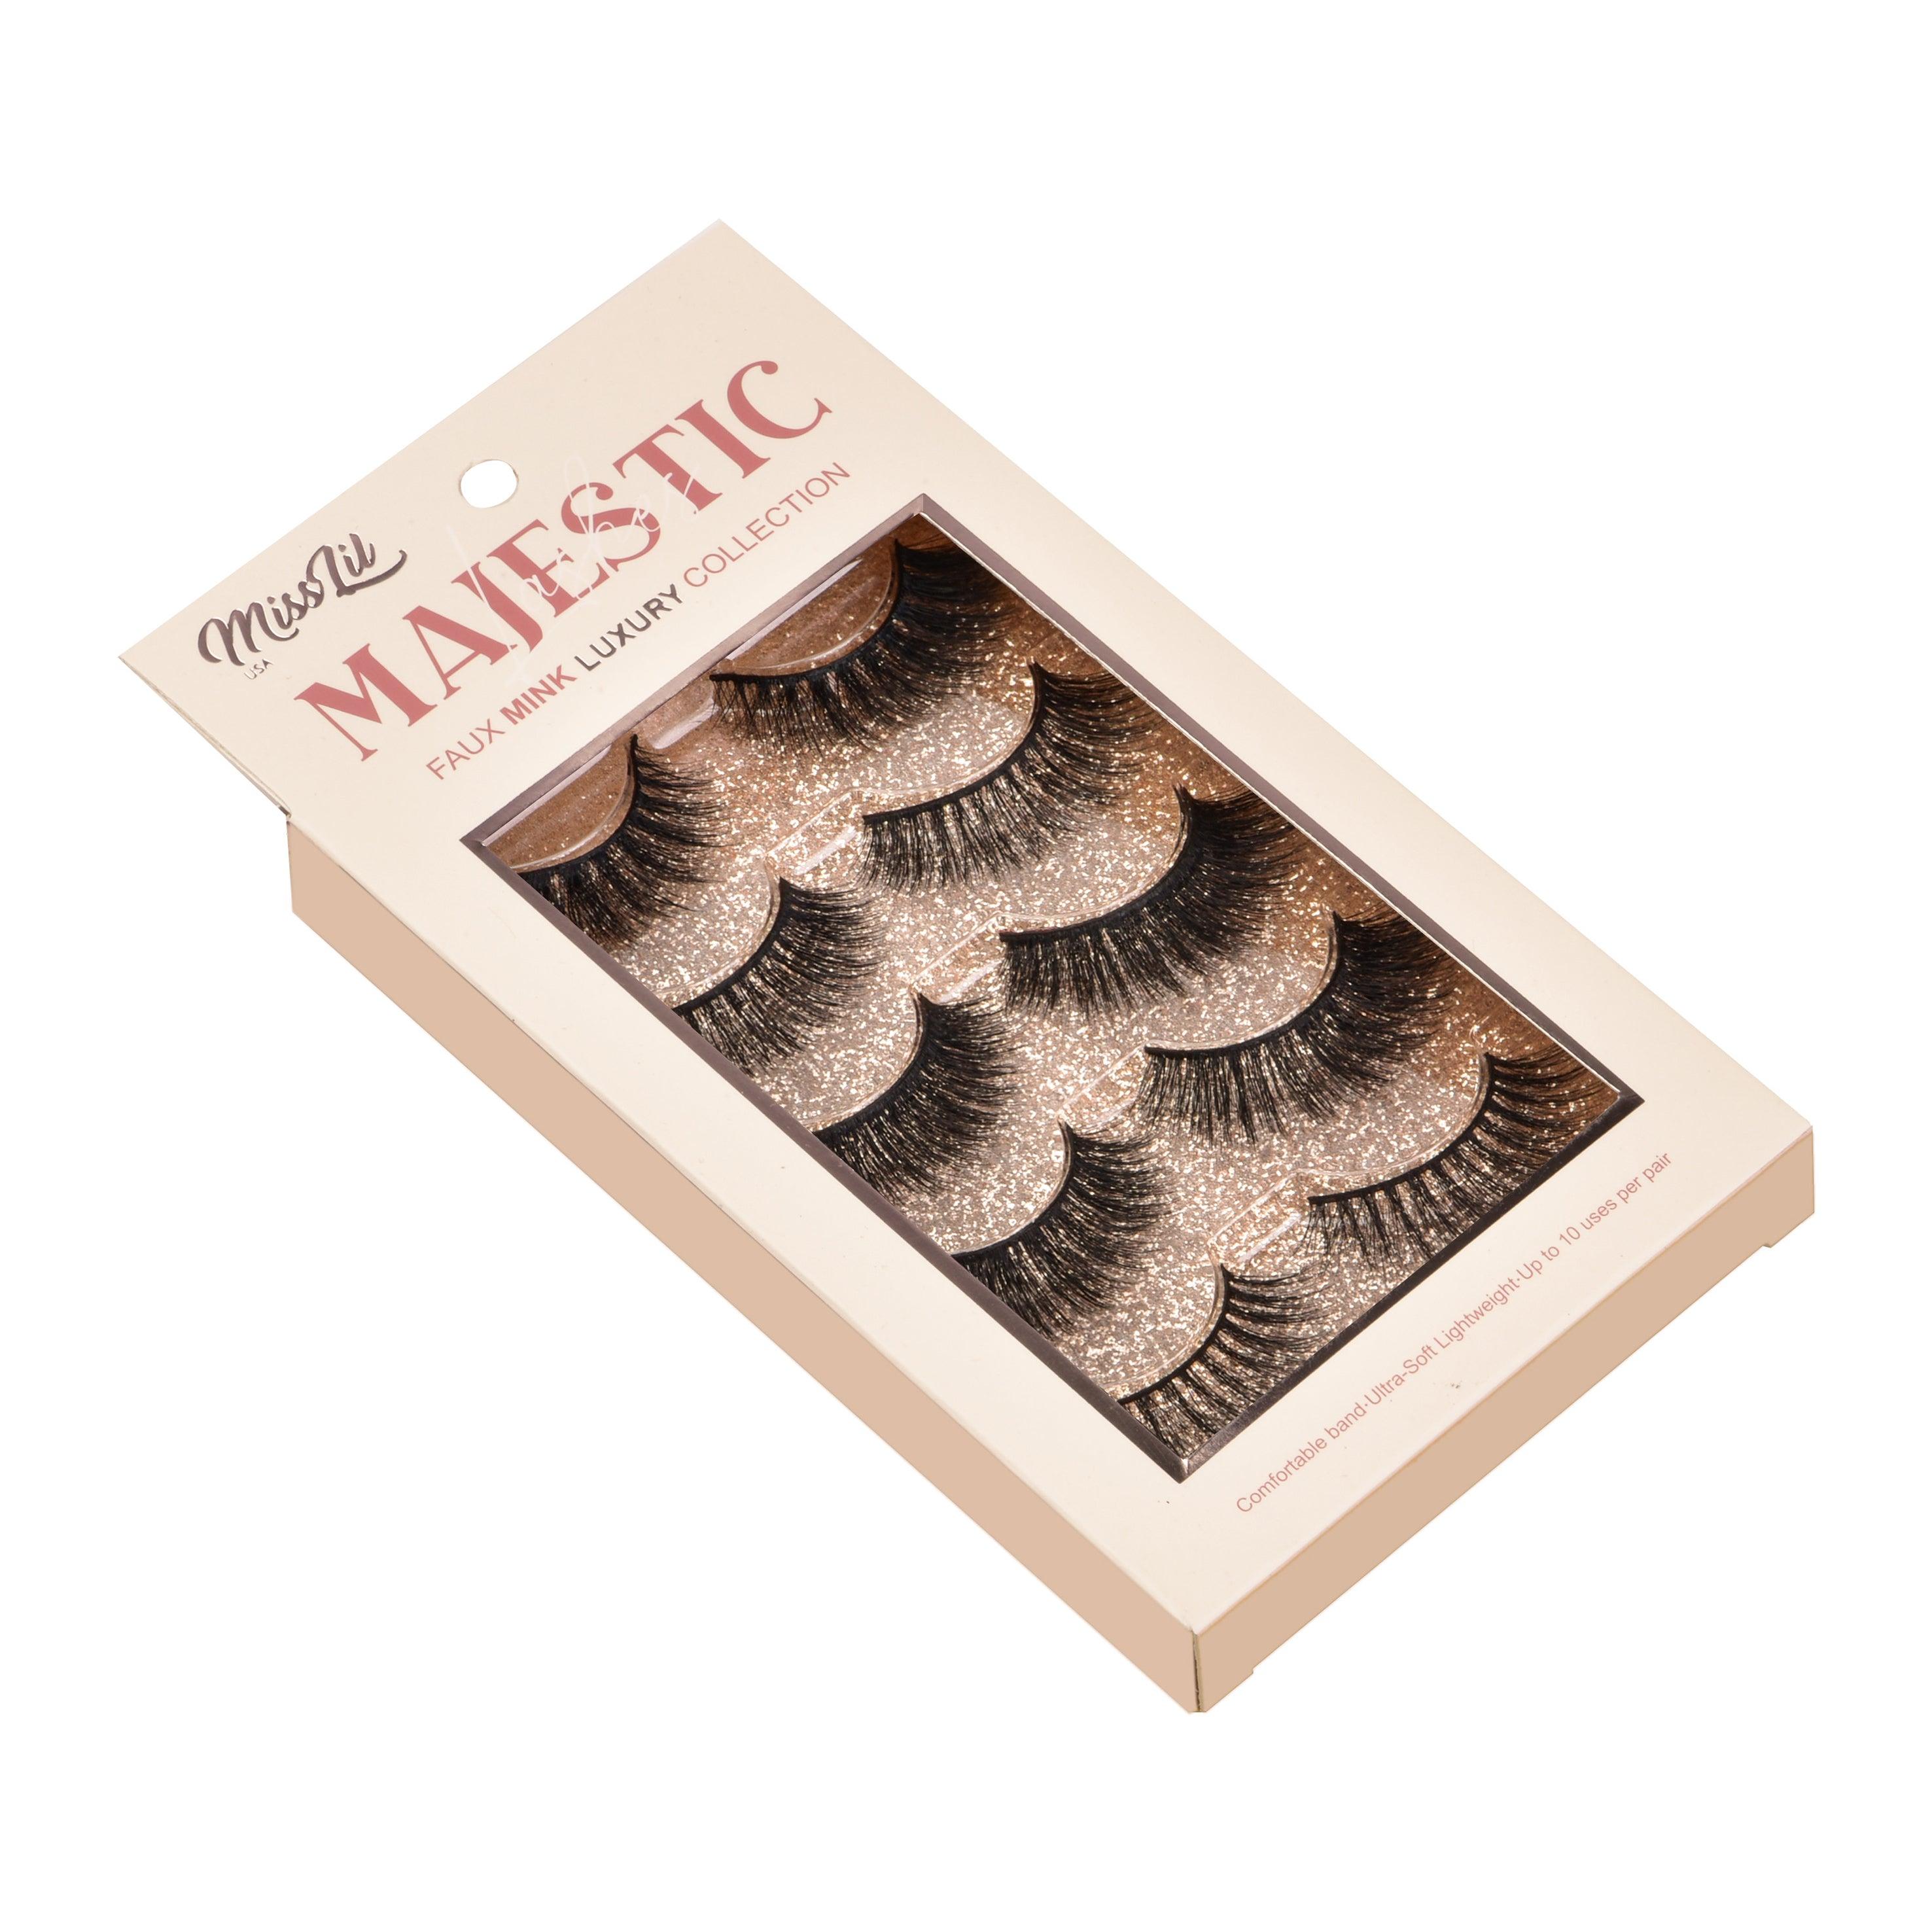 5 Pairs Majestic Collection Lashes #9 - Miss Lil USA